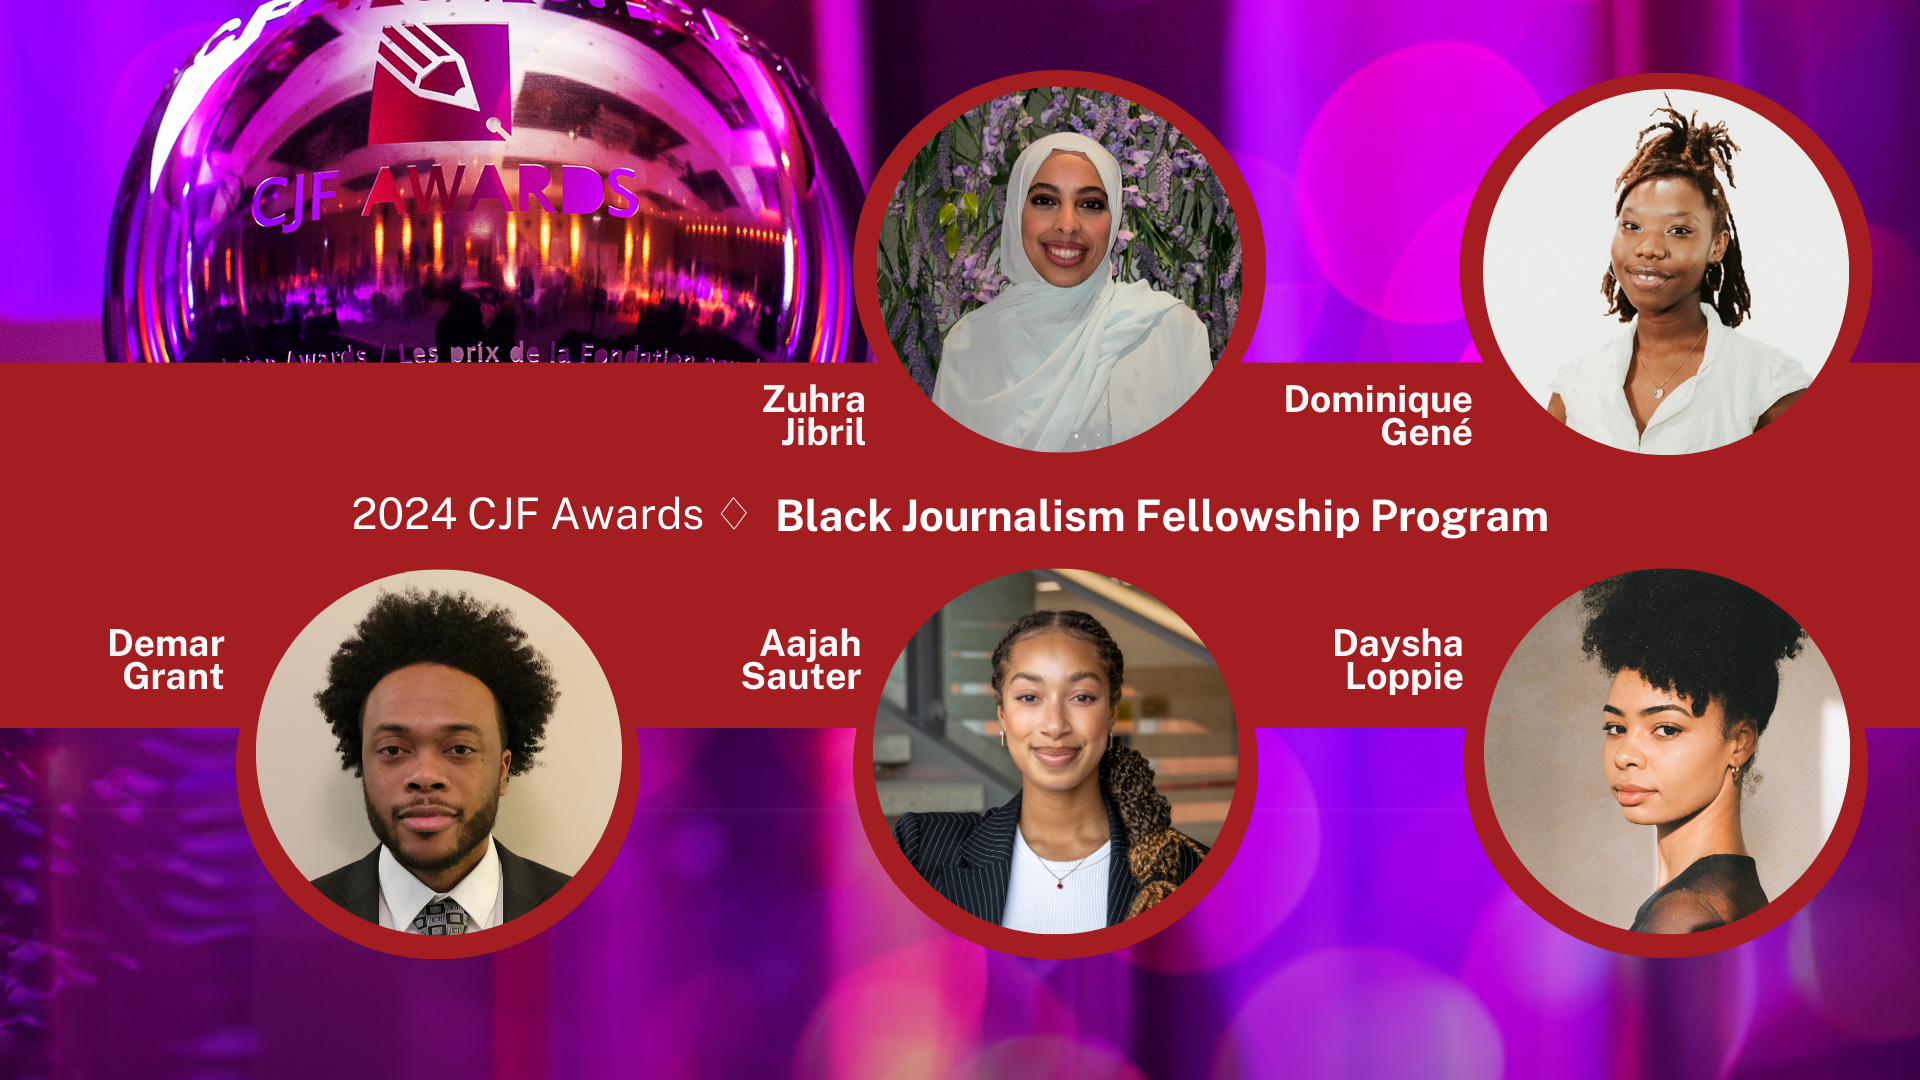 A poster announcing the 2024 the recipients of the Black Journalism Fellowship Program. The list includes Zuhra Jibril, Dominique Gené, Demar Grant, Aajah Sauter and Daysha Loppie.The CJF Awards prize bowl is seen in the background.